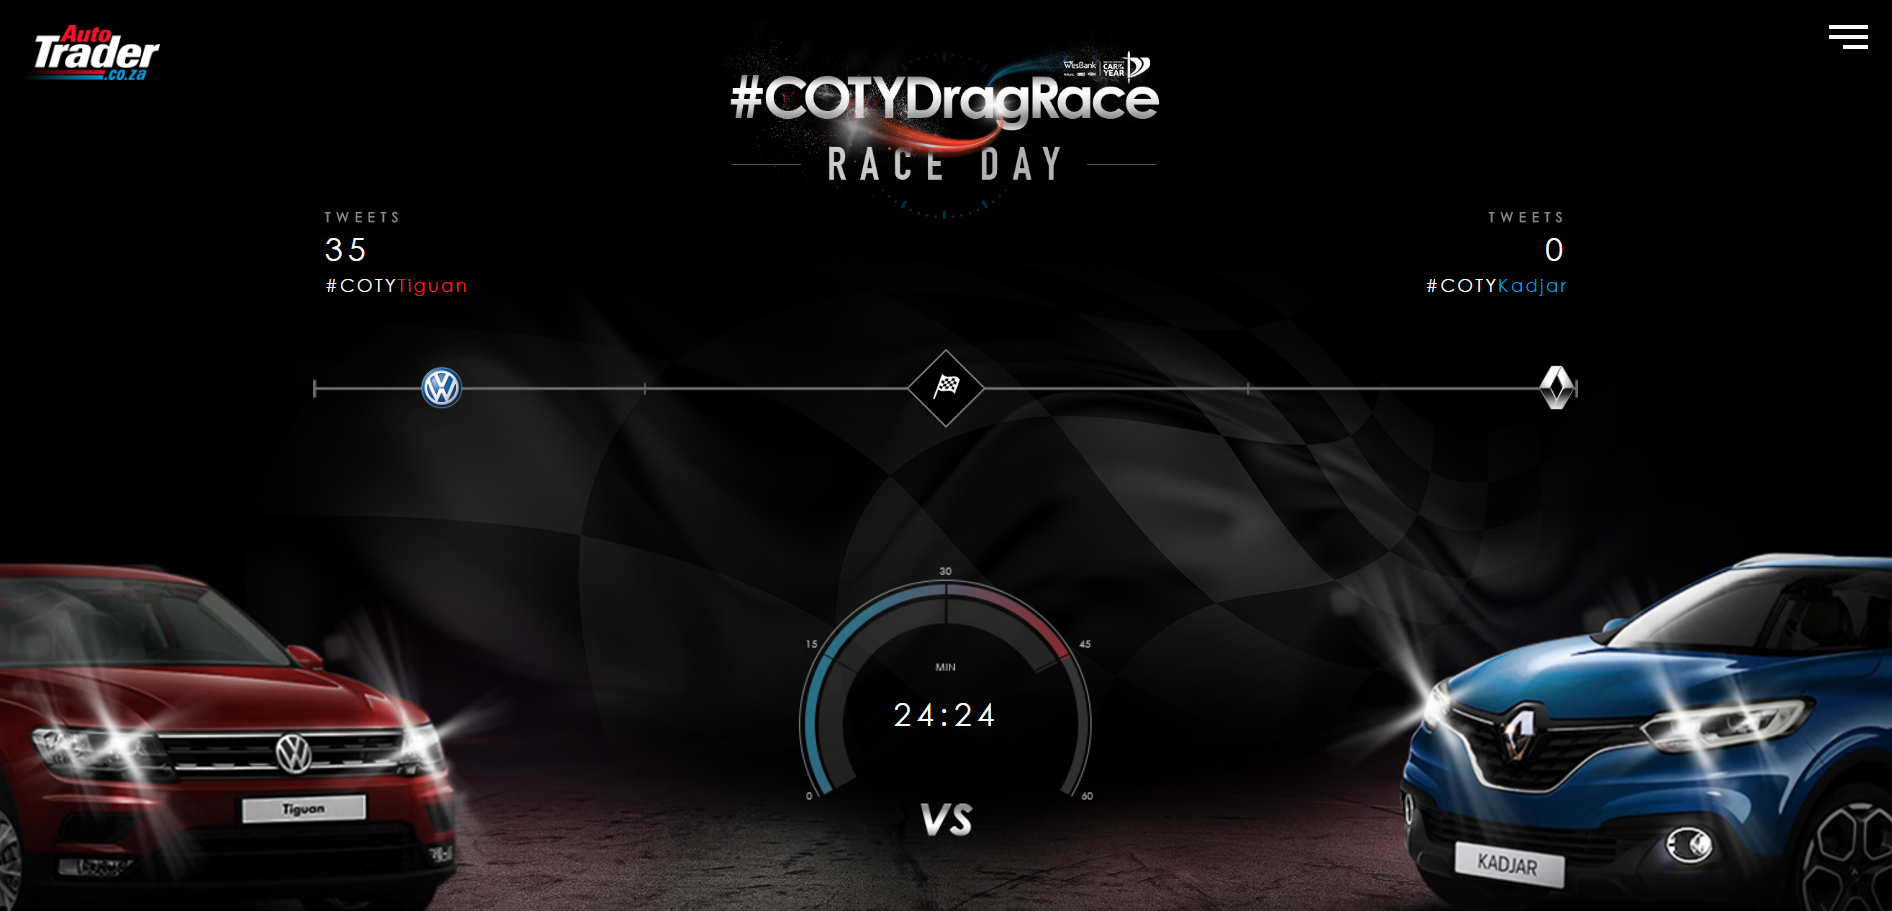 AutoTrader and African Based Agency Liquorice Launch Twitter’s First-Ever Virtual Drag Race